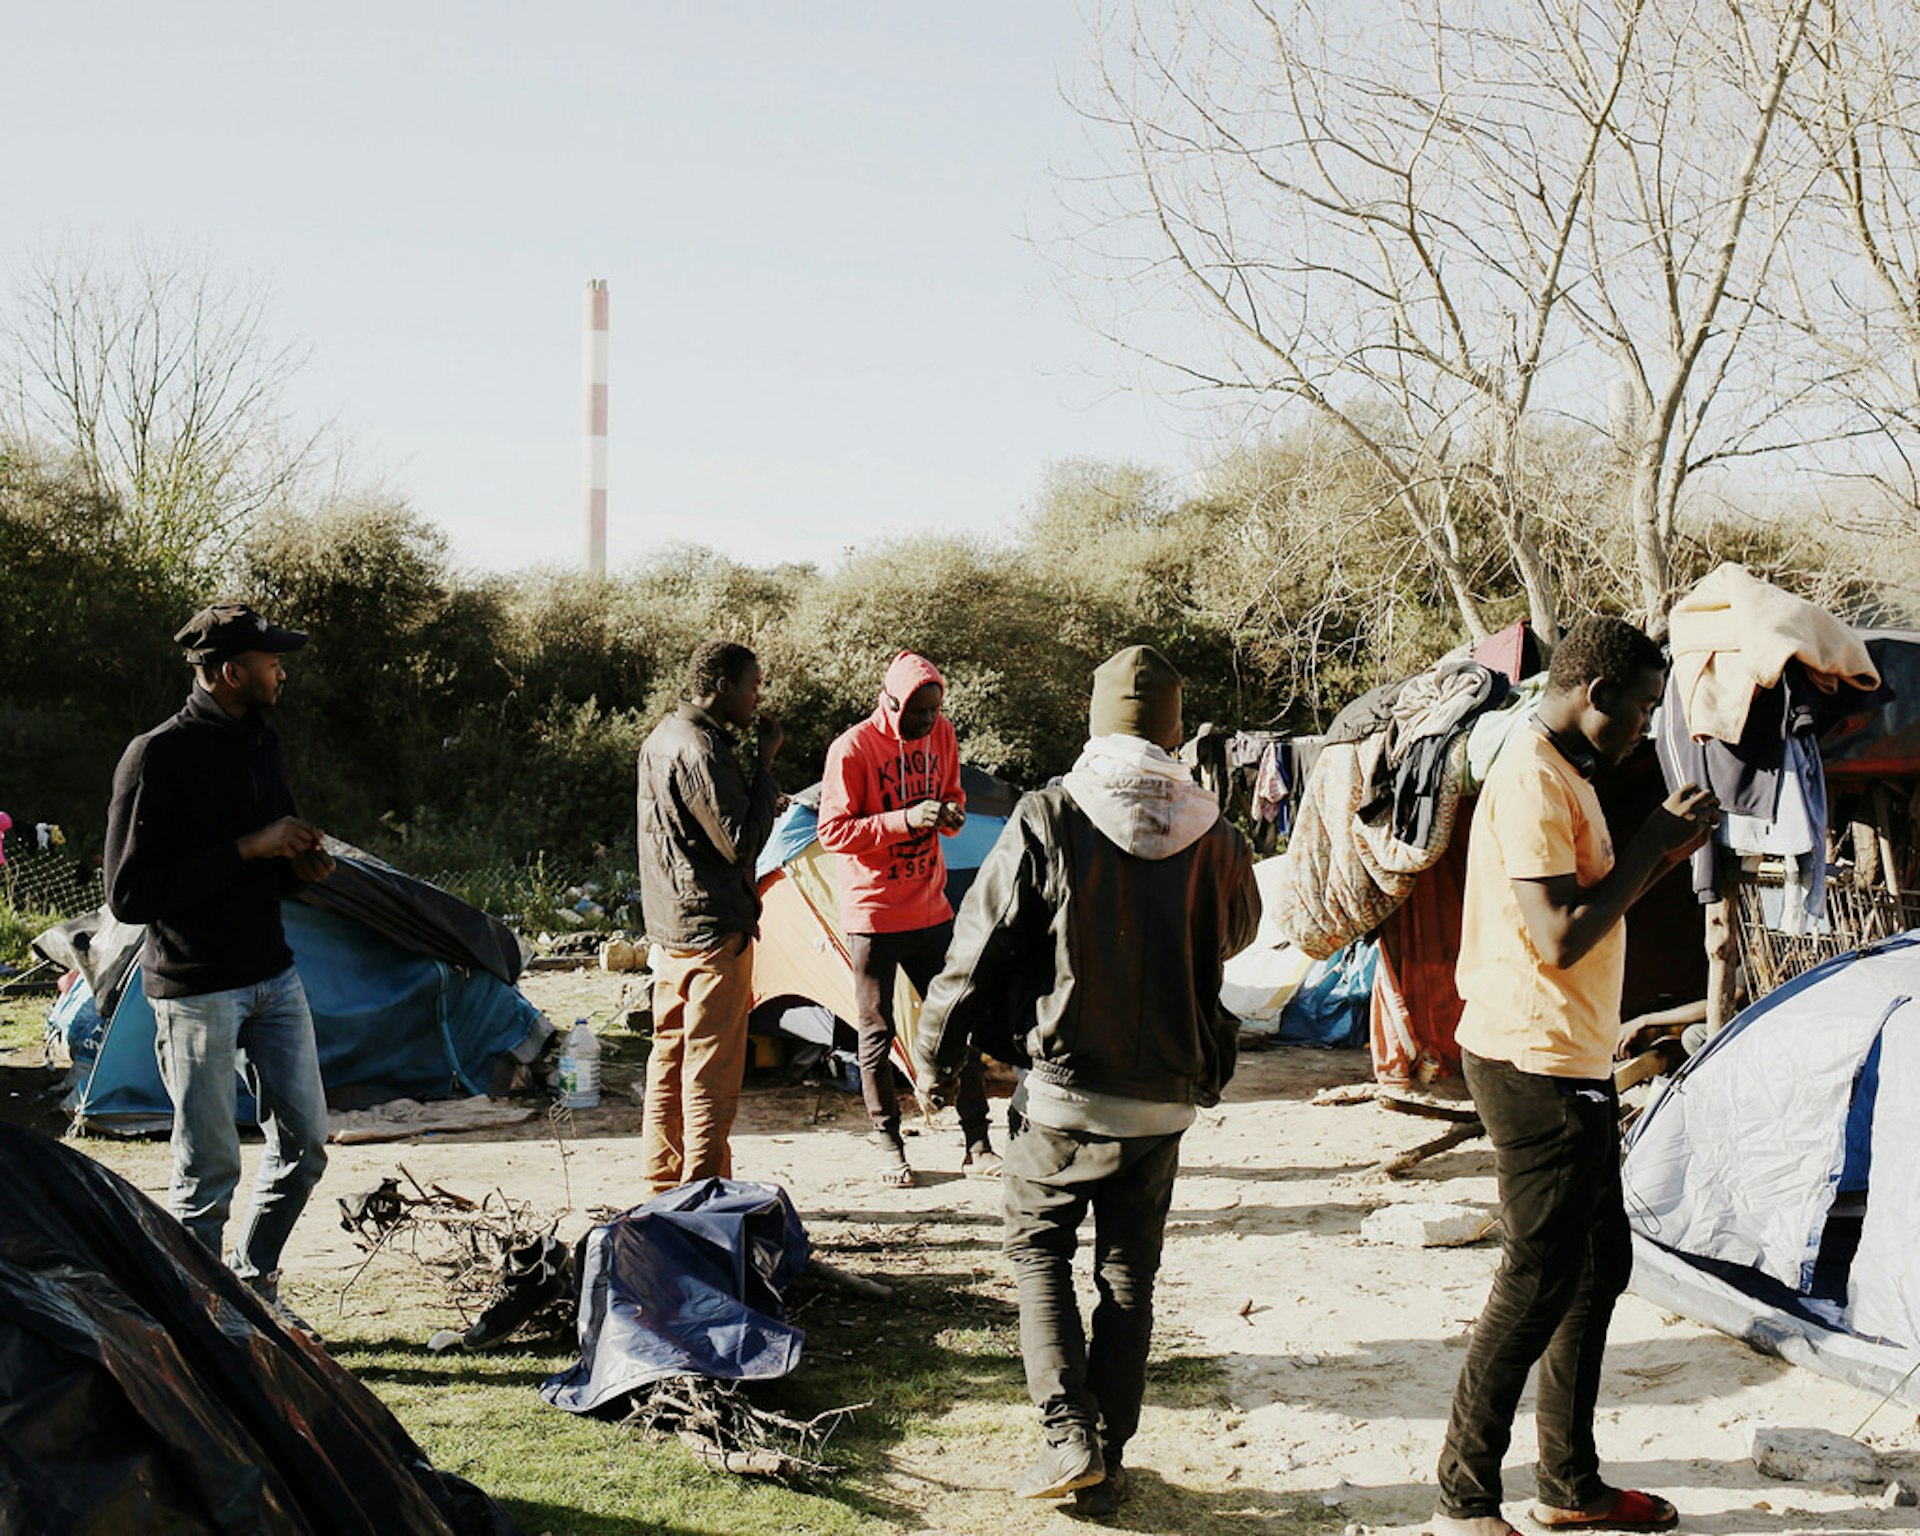 A growing grassroots movement is supporting the Calais refugees